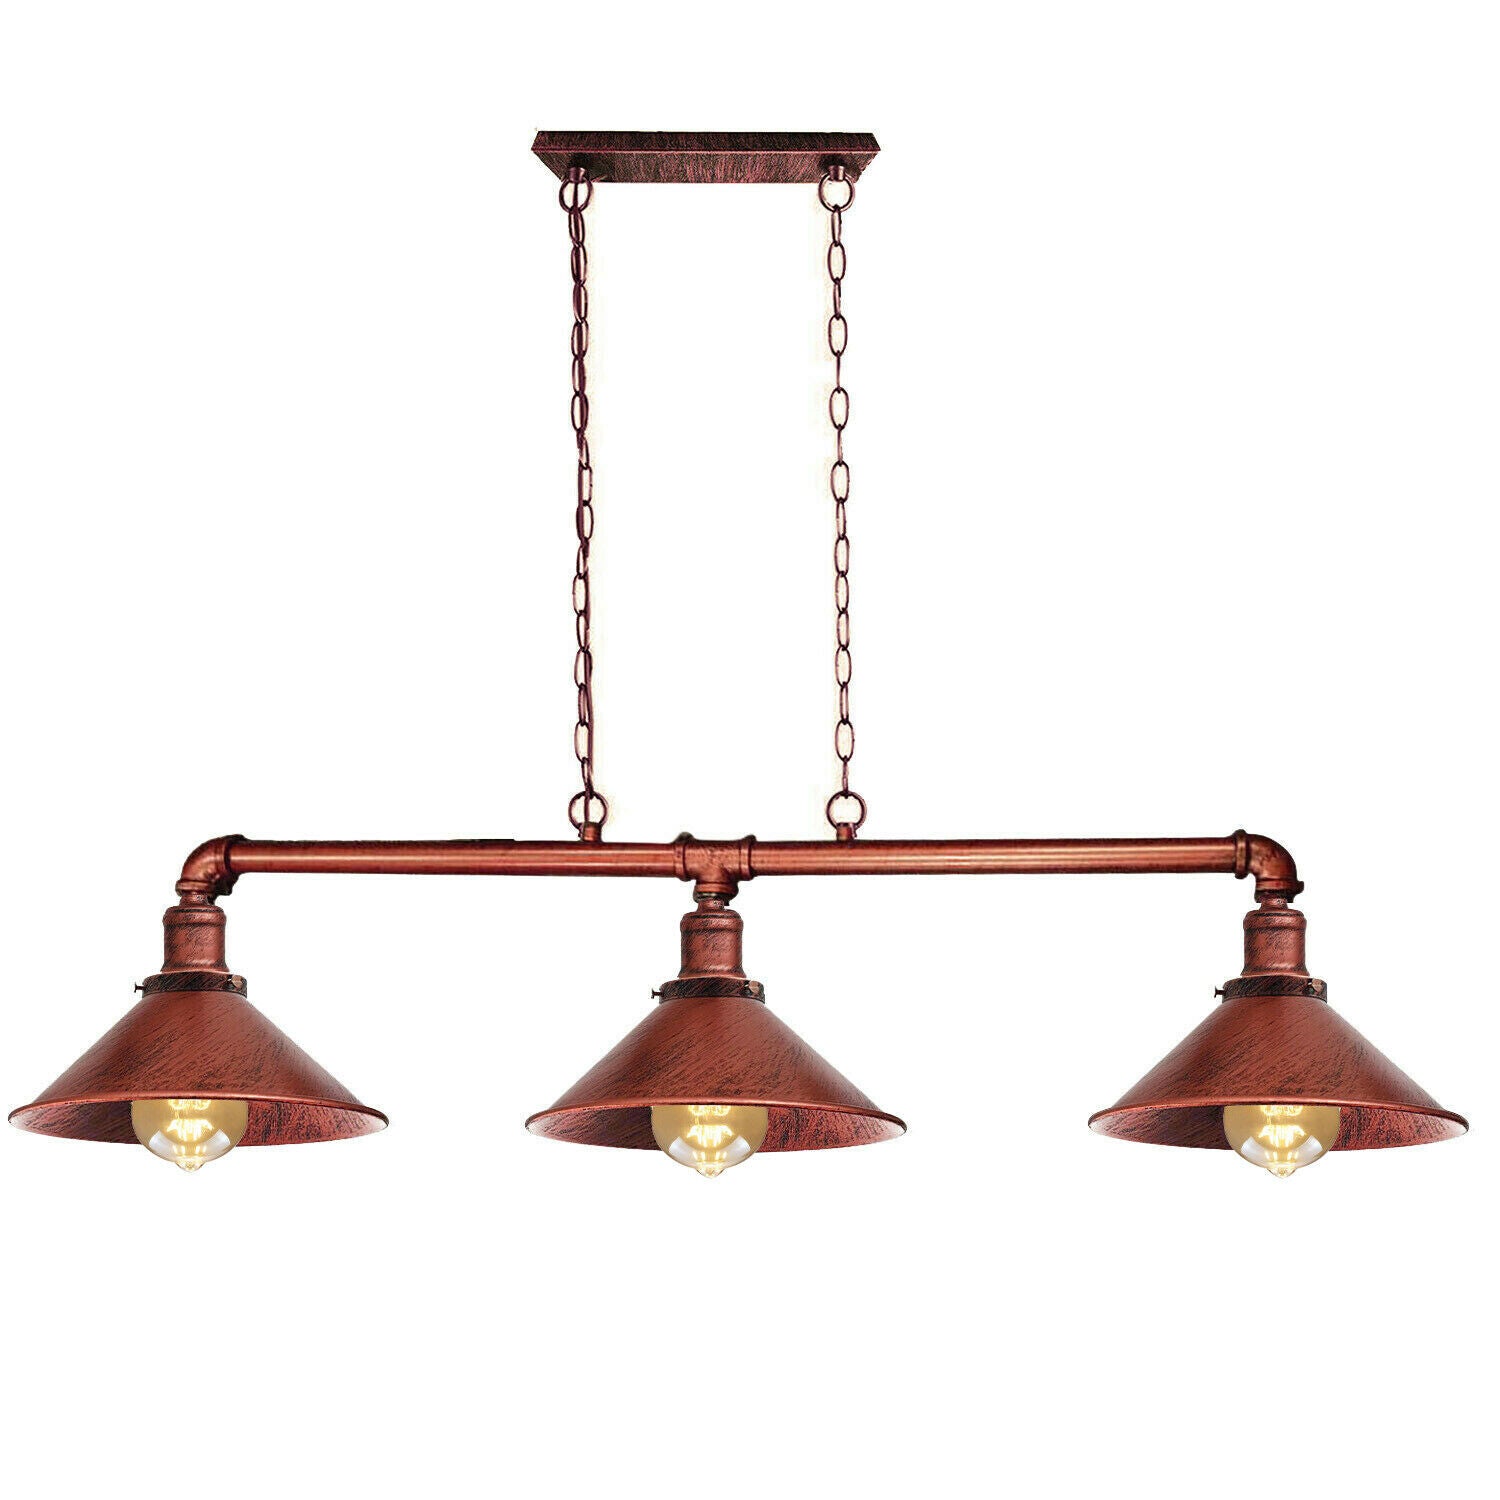 3Way Vintage Cabin Ceiling Pipe Light Steampunk Lamp Shades